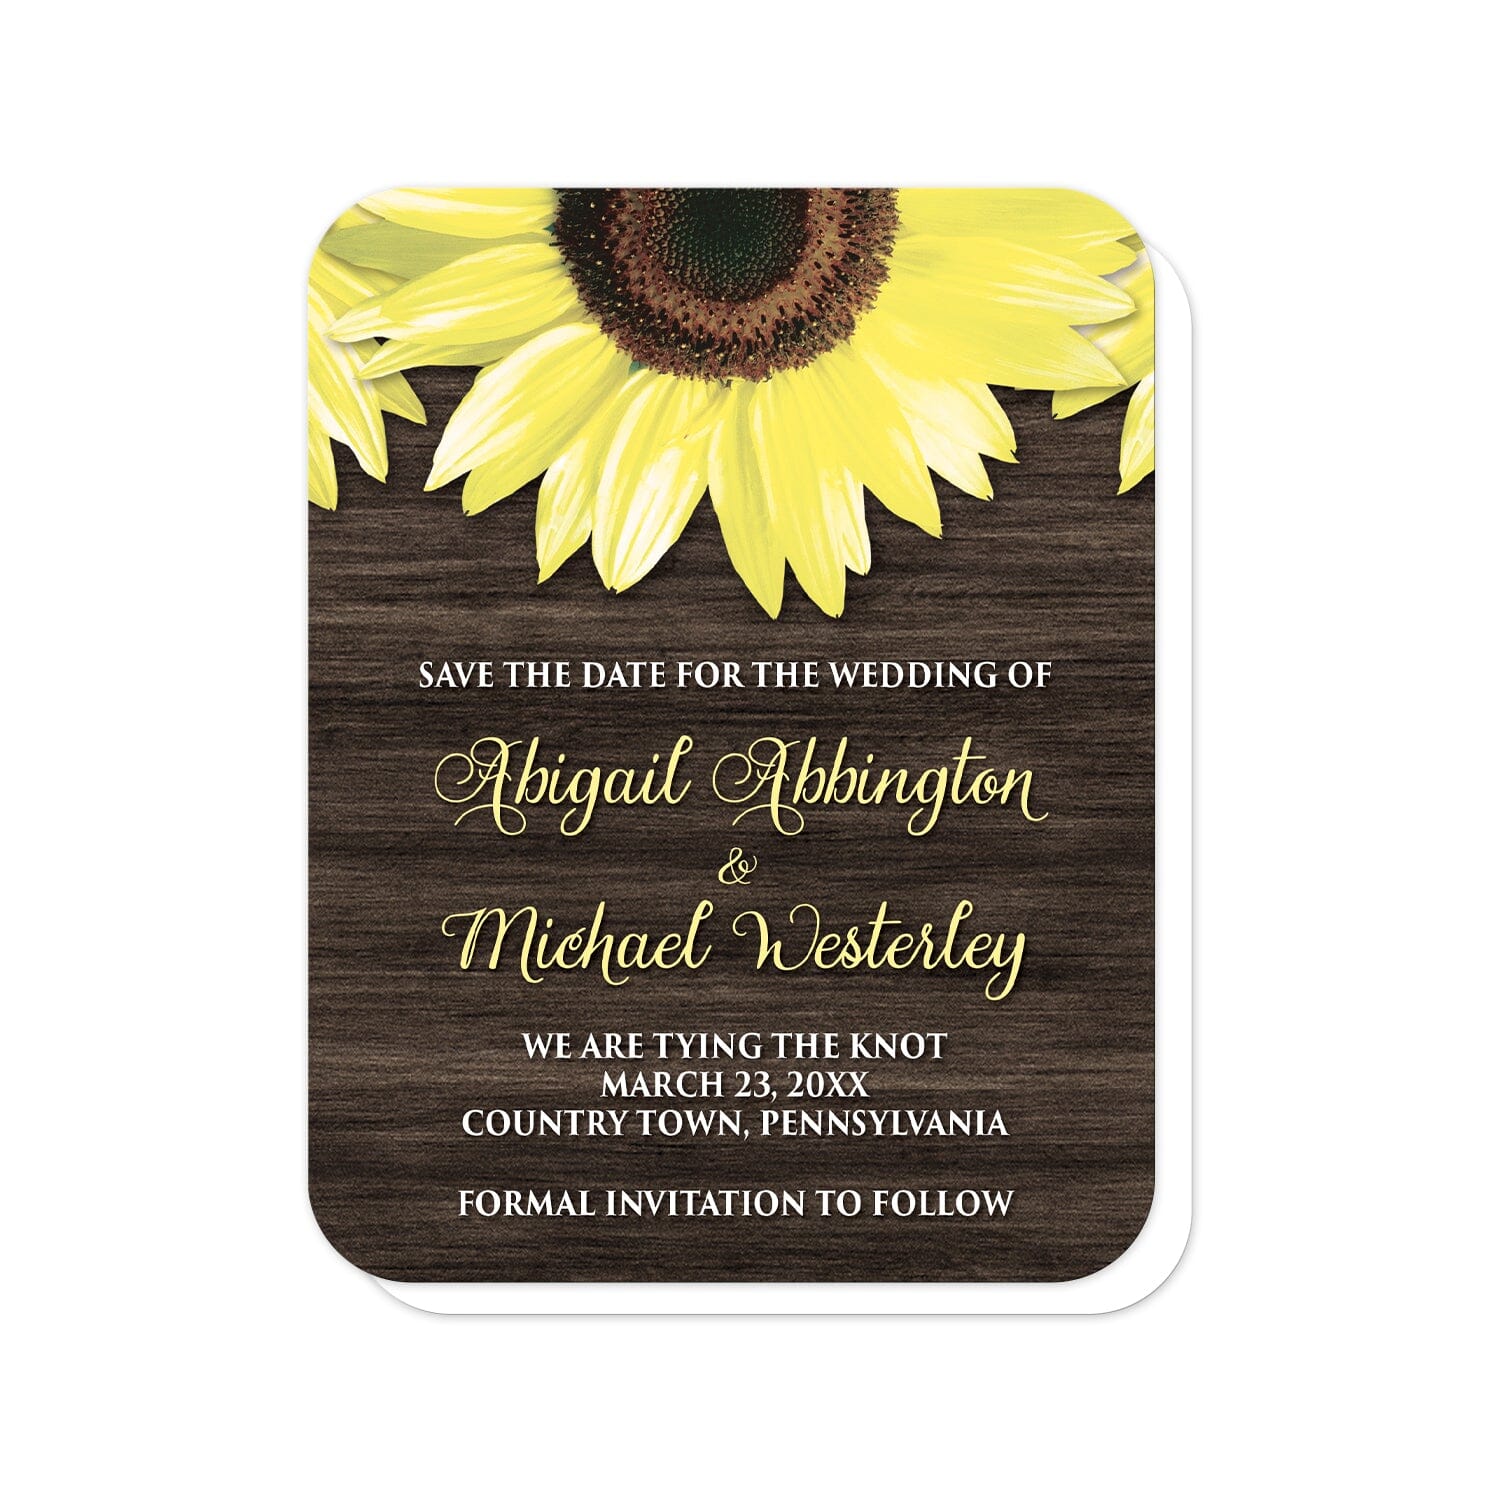 Rustic Sunflower and Wood Save the Date Cards (with rounded corners) at Artistically Invited. Southern-inspired rustic sunflower and wood save the date cards designed with large yellow sunflowers along the top over a country brown wood design. Your personalized wedding date details are custom printed in yellow and white over the brown wood background below the pretty sunflowers. 